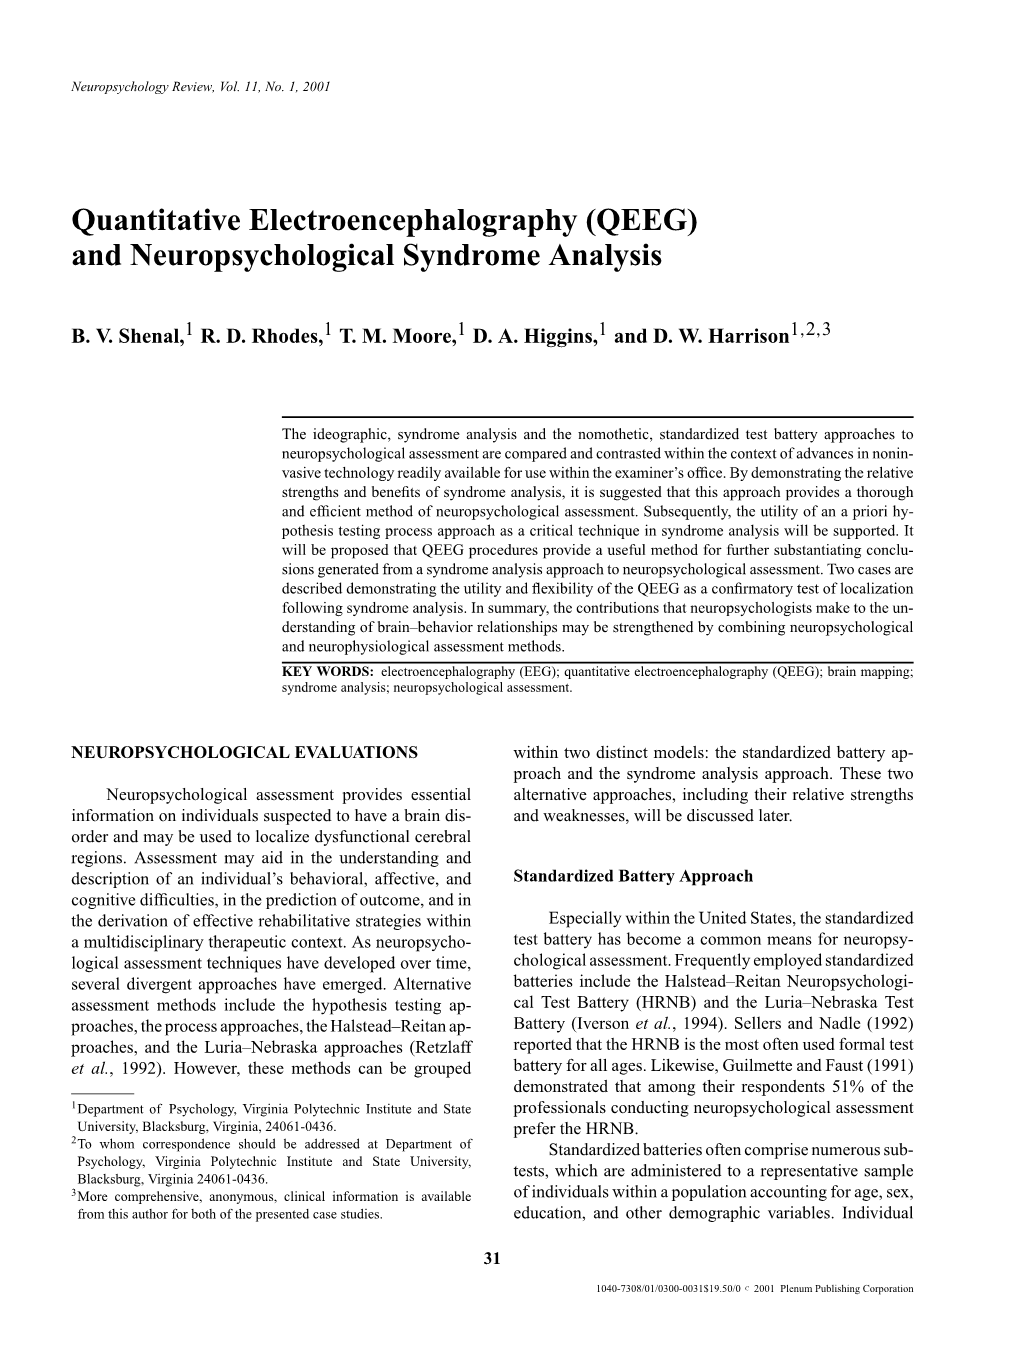 QEEG) and Neuropsychological Syndrome Analysis